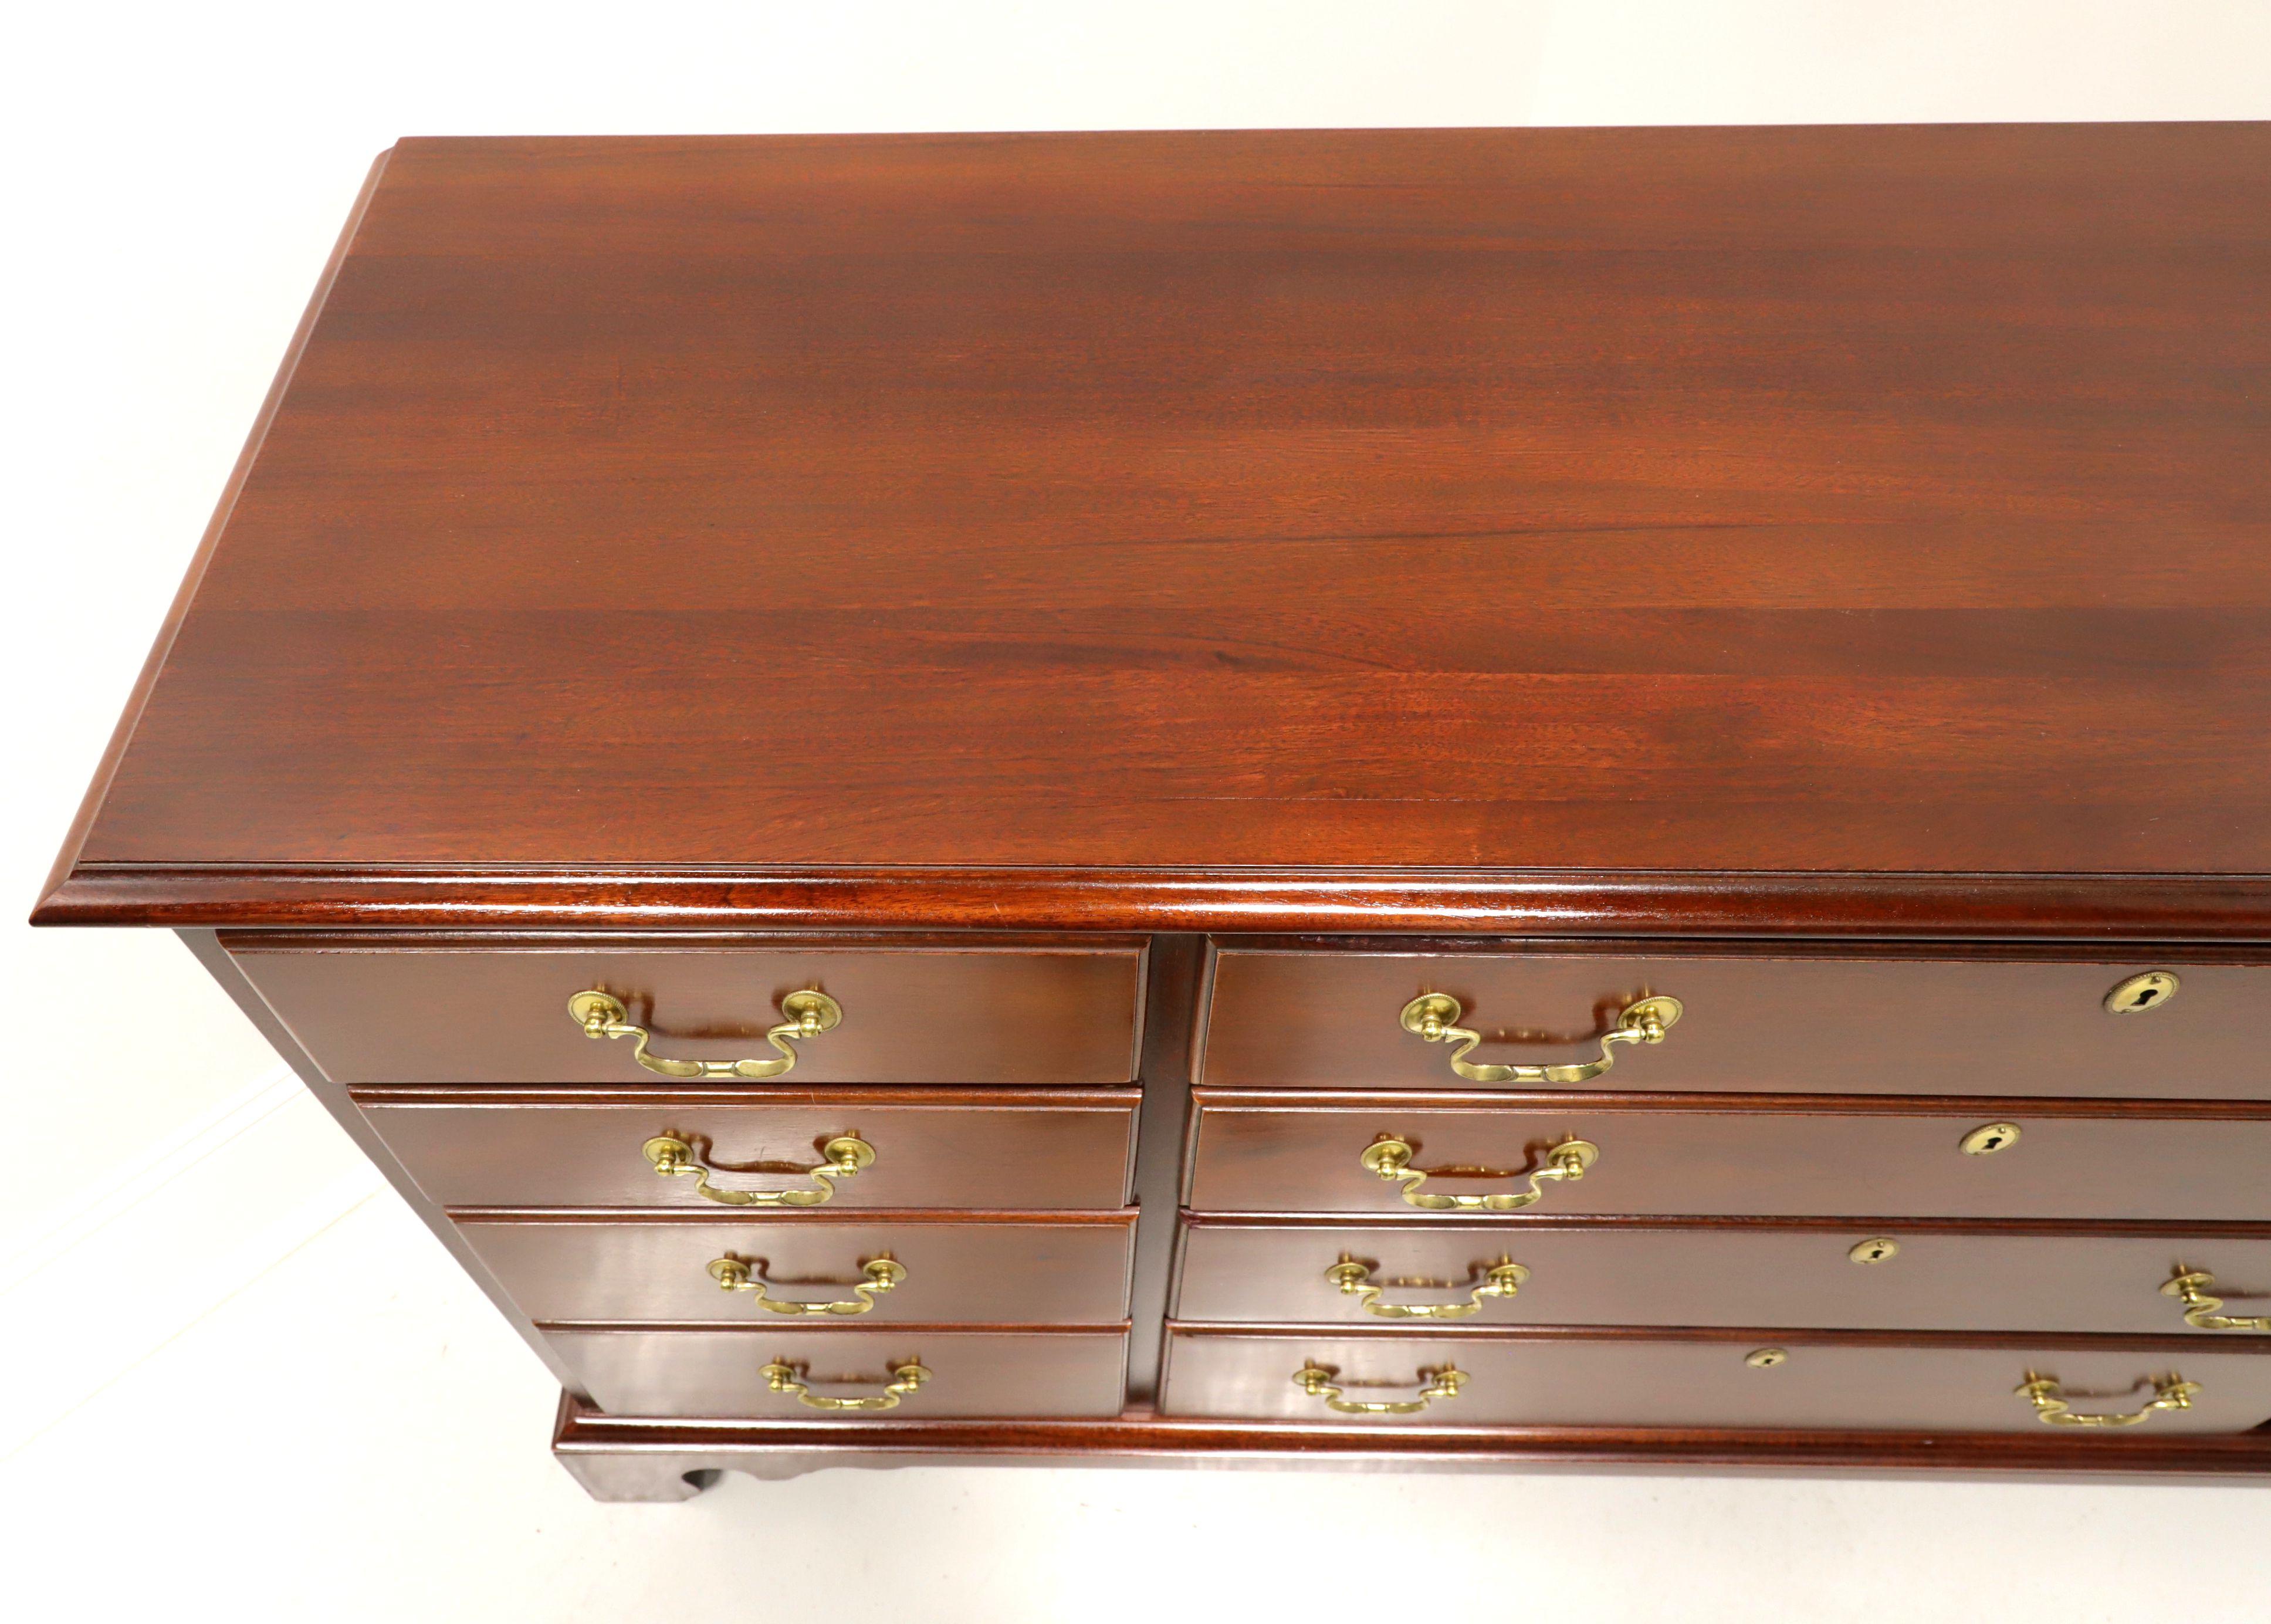 American LINK-TAYLOR Heirloom Beaufort Solid Mahogany Chippendale Triple Dresser - A For Sale